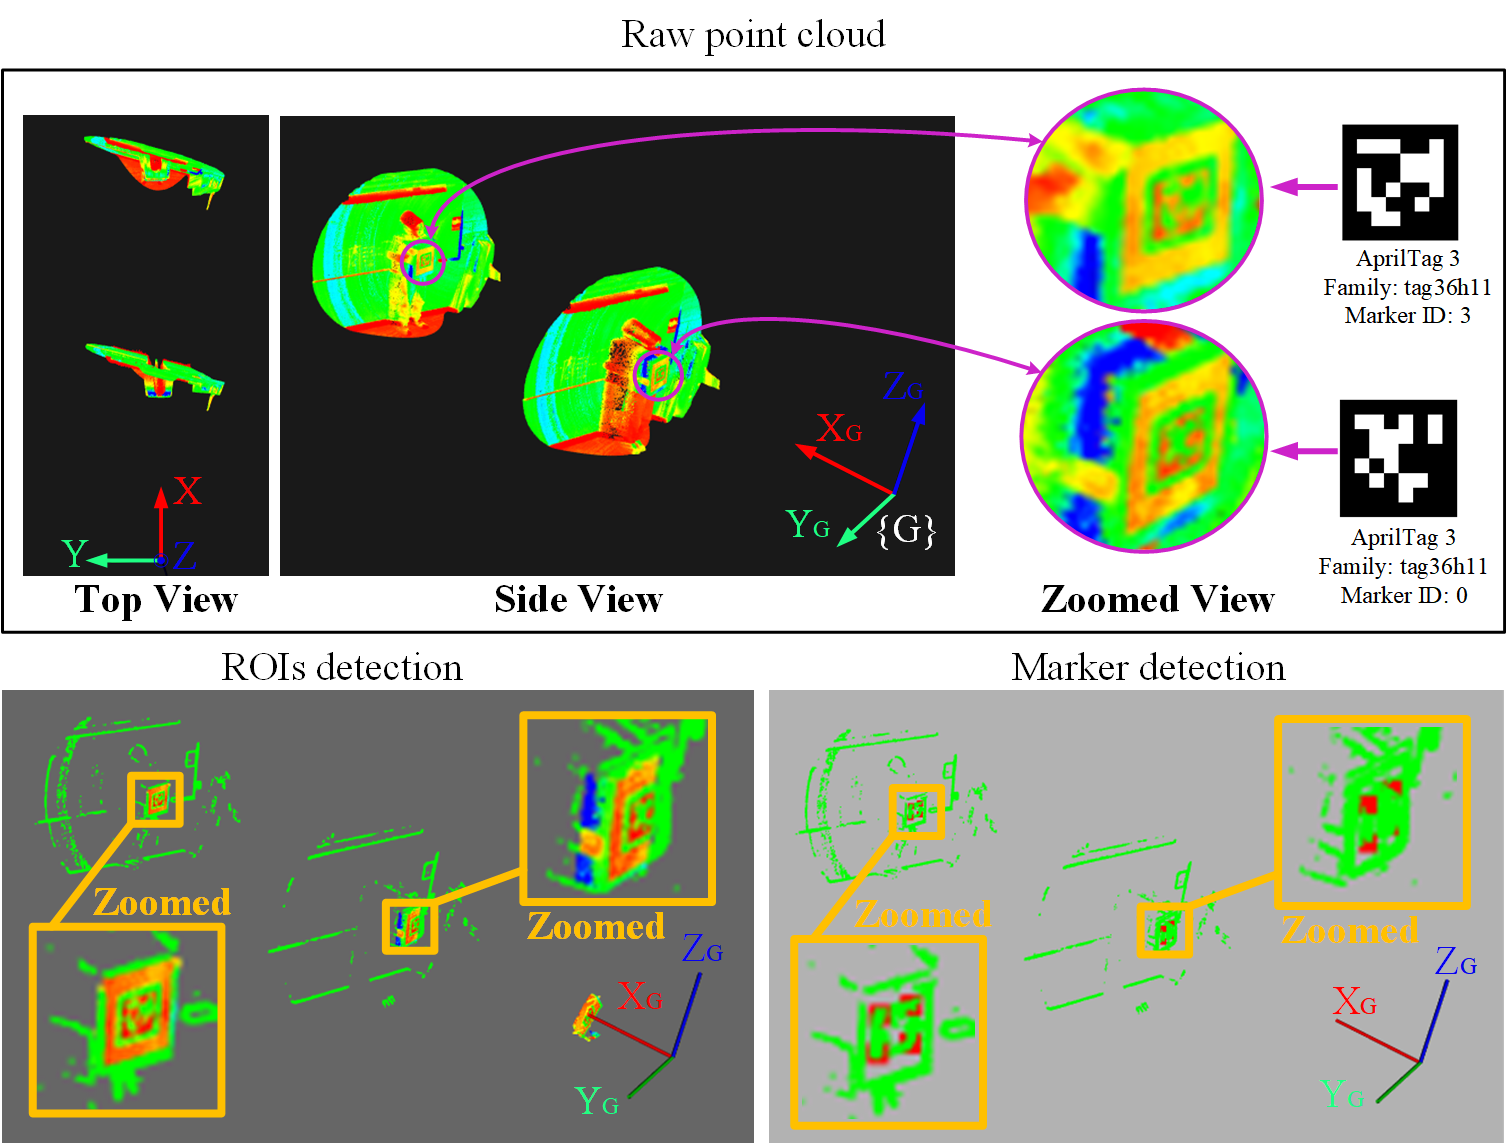  The evaluation of marker detection on a multi-viewpoint point cloud, which is a stitch of multiple one-viewpoint point clouds.